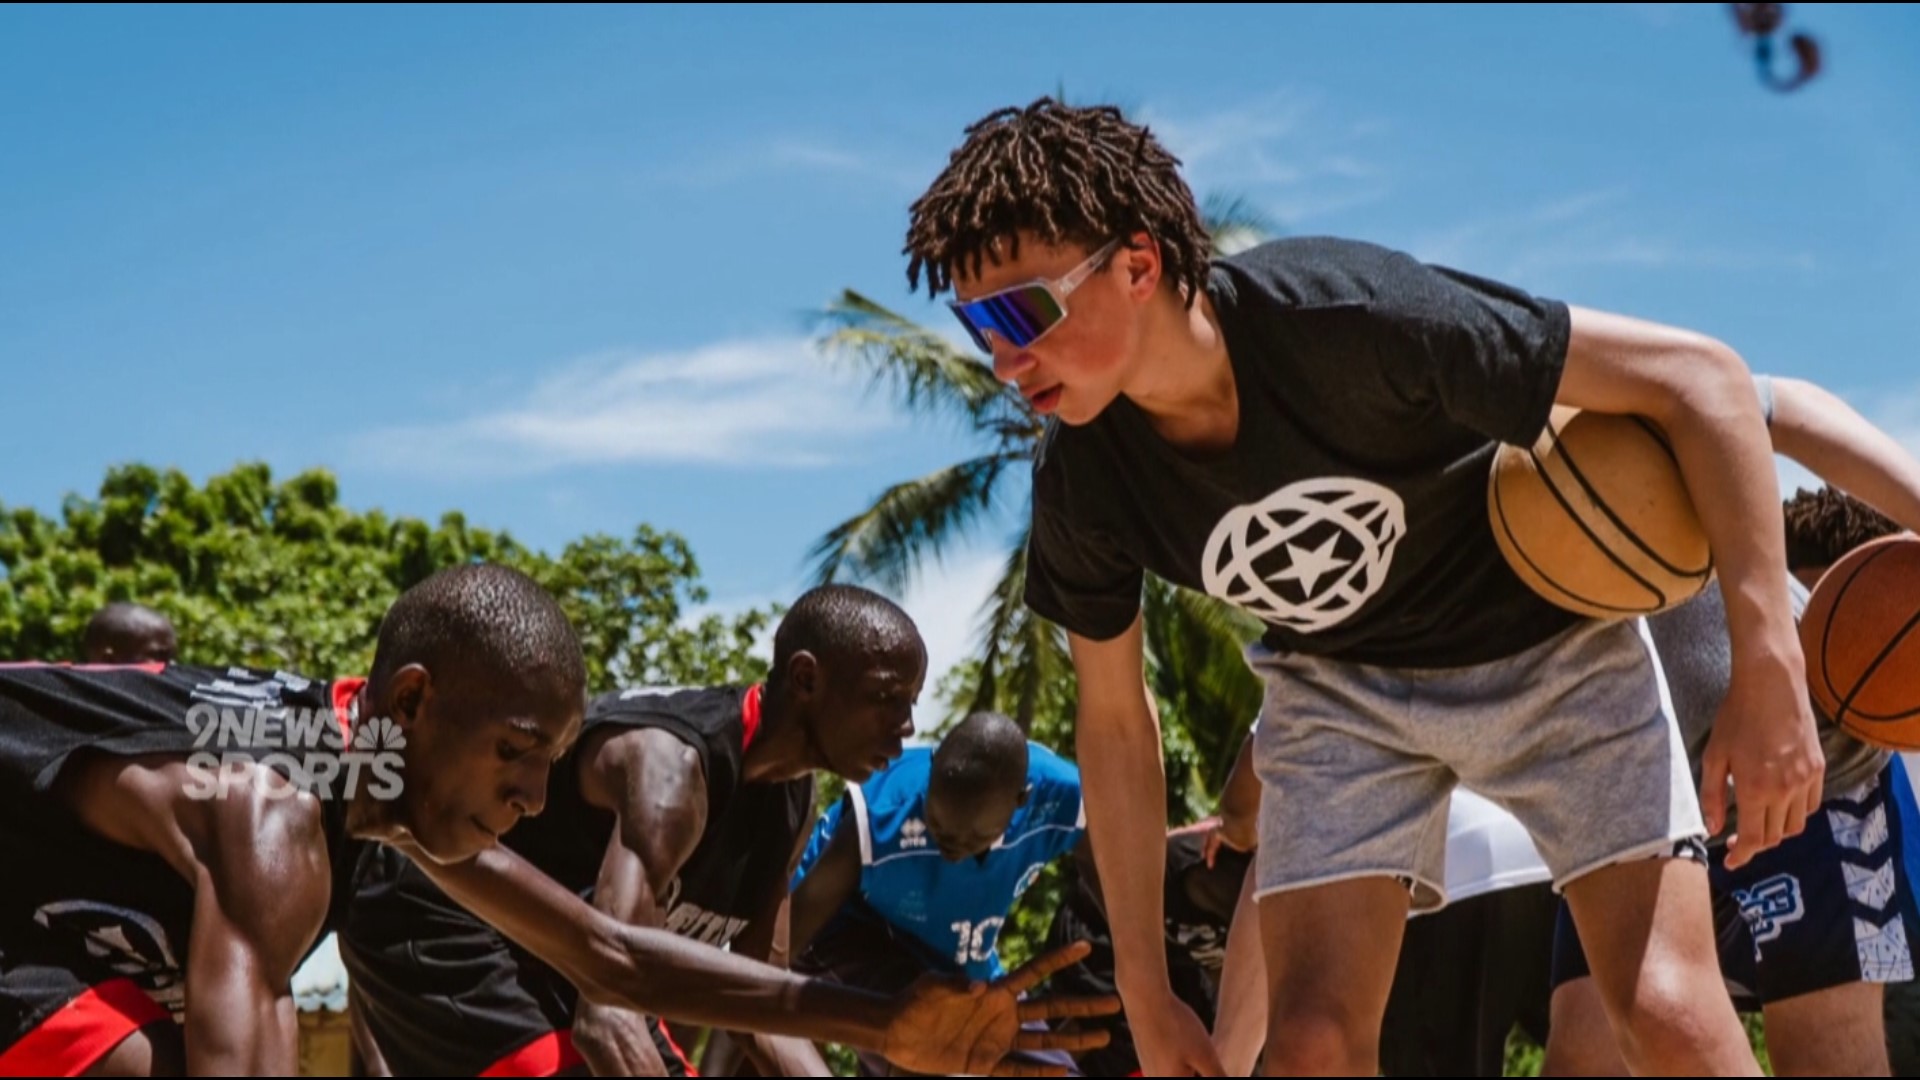 Two Smoky Hill HS athletes went to Kenya to build schools, classrooms, teach basketball, give shoes, etc. for an initiative called Koins for Kenya.